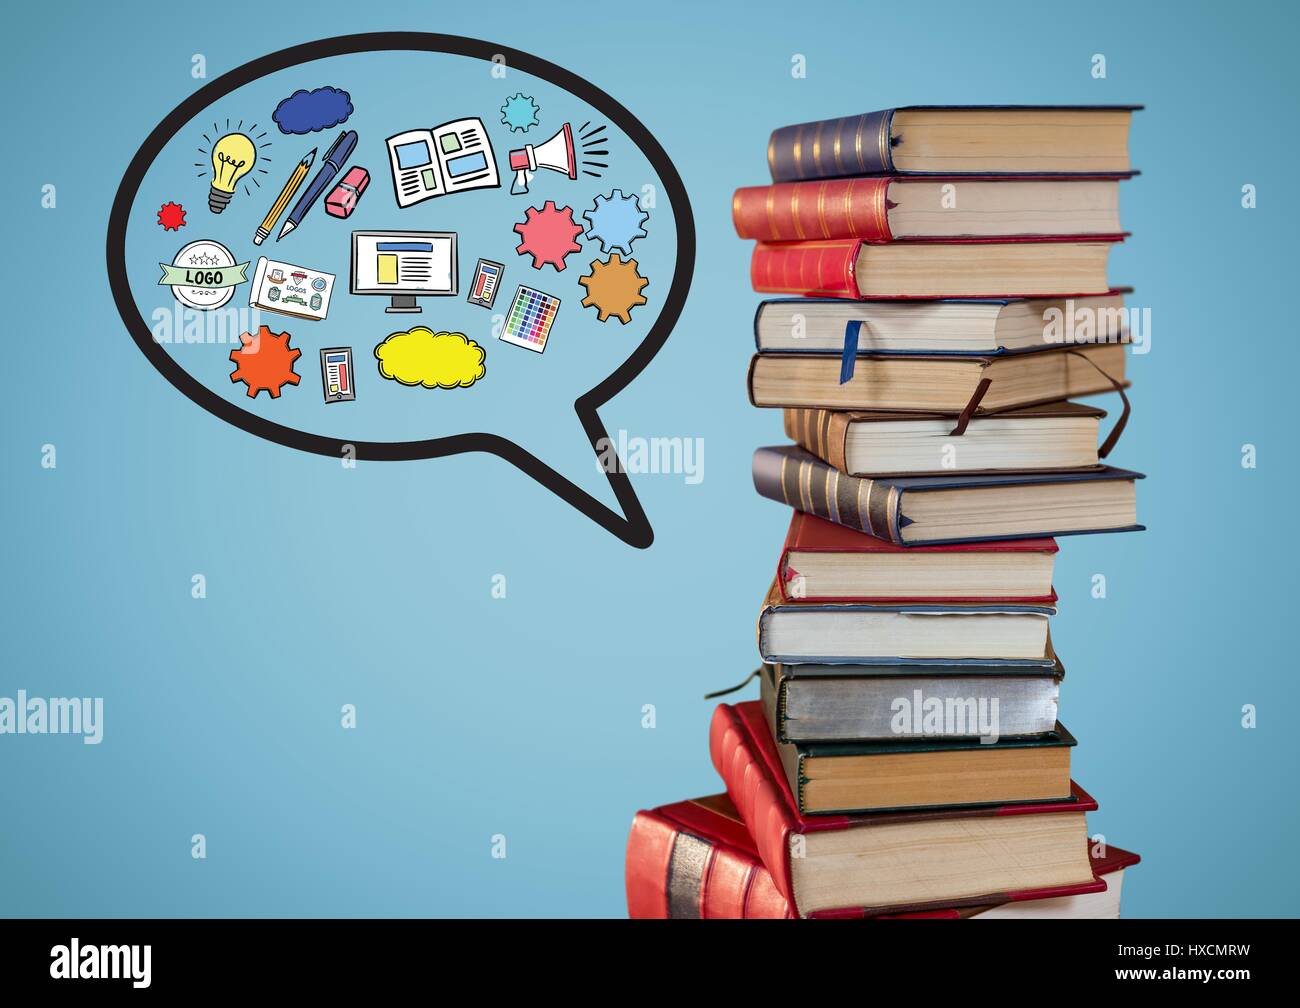 Digital Composite Of Pile Of Books With Speech Bubble And Graphics